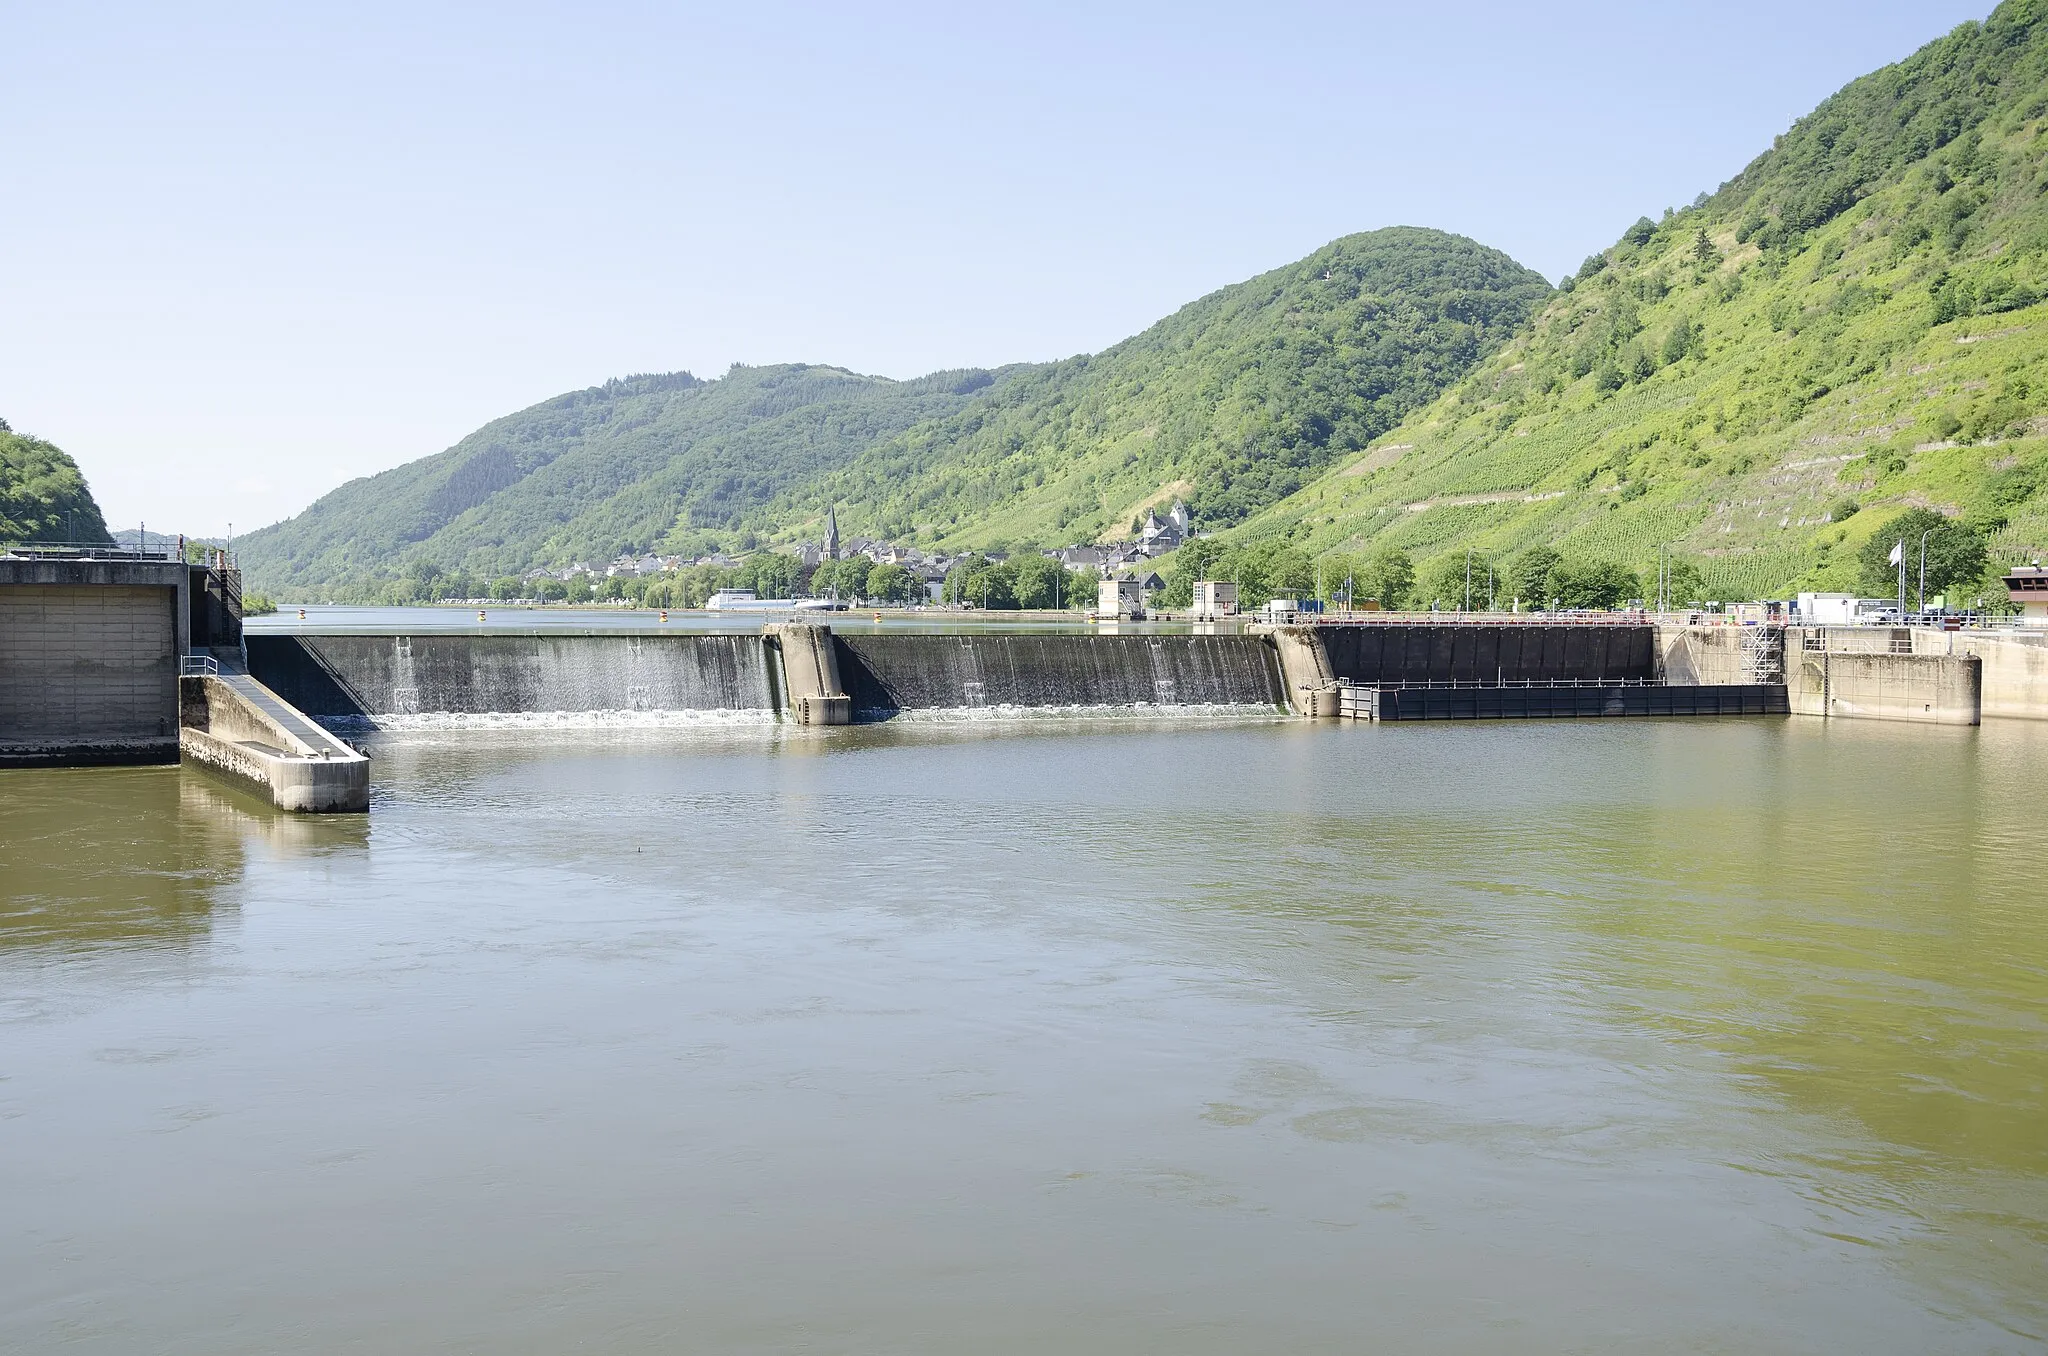 Photo showing: The dam and locks at Neef on the Mosel river, Germany.